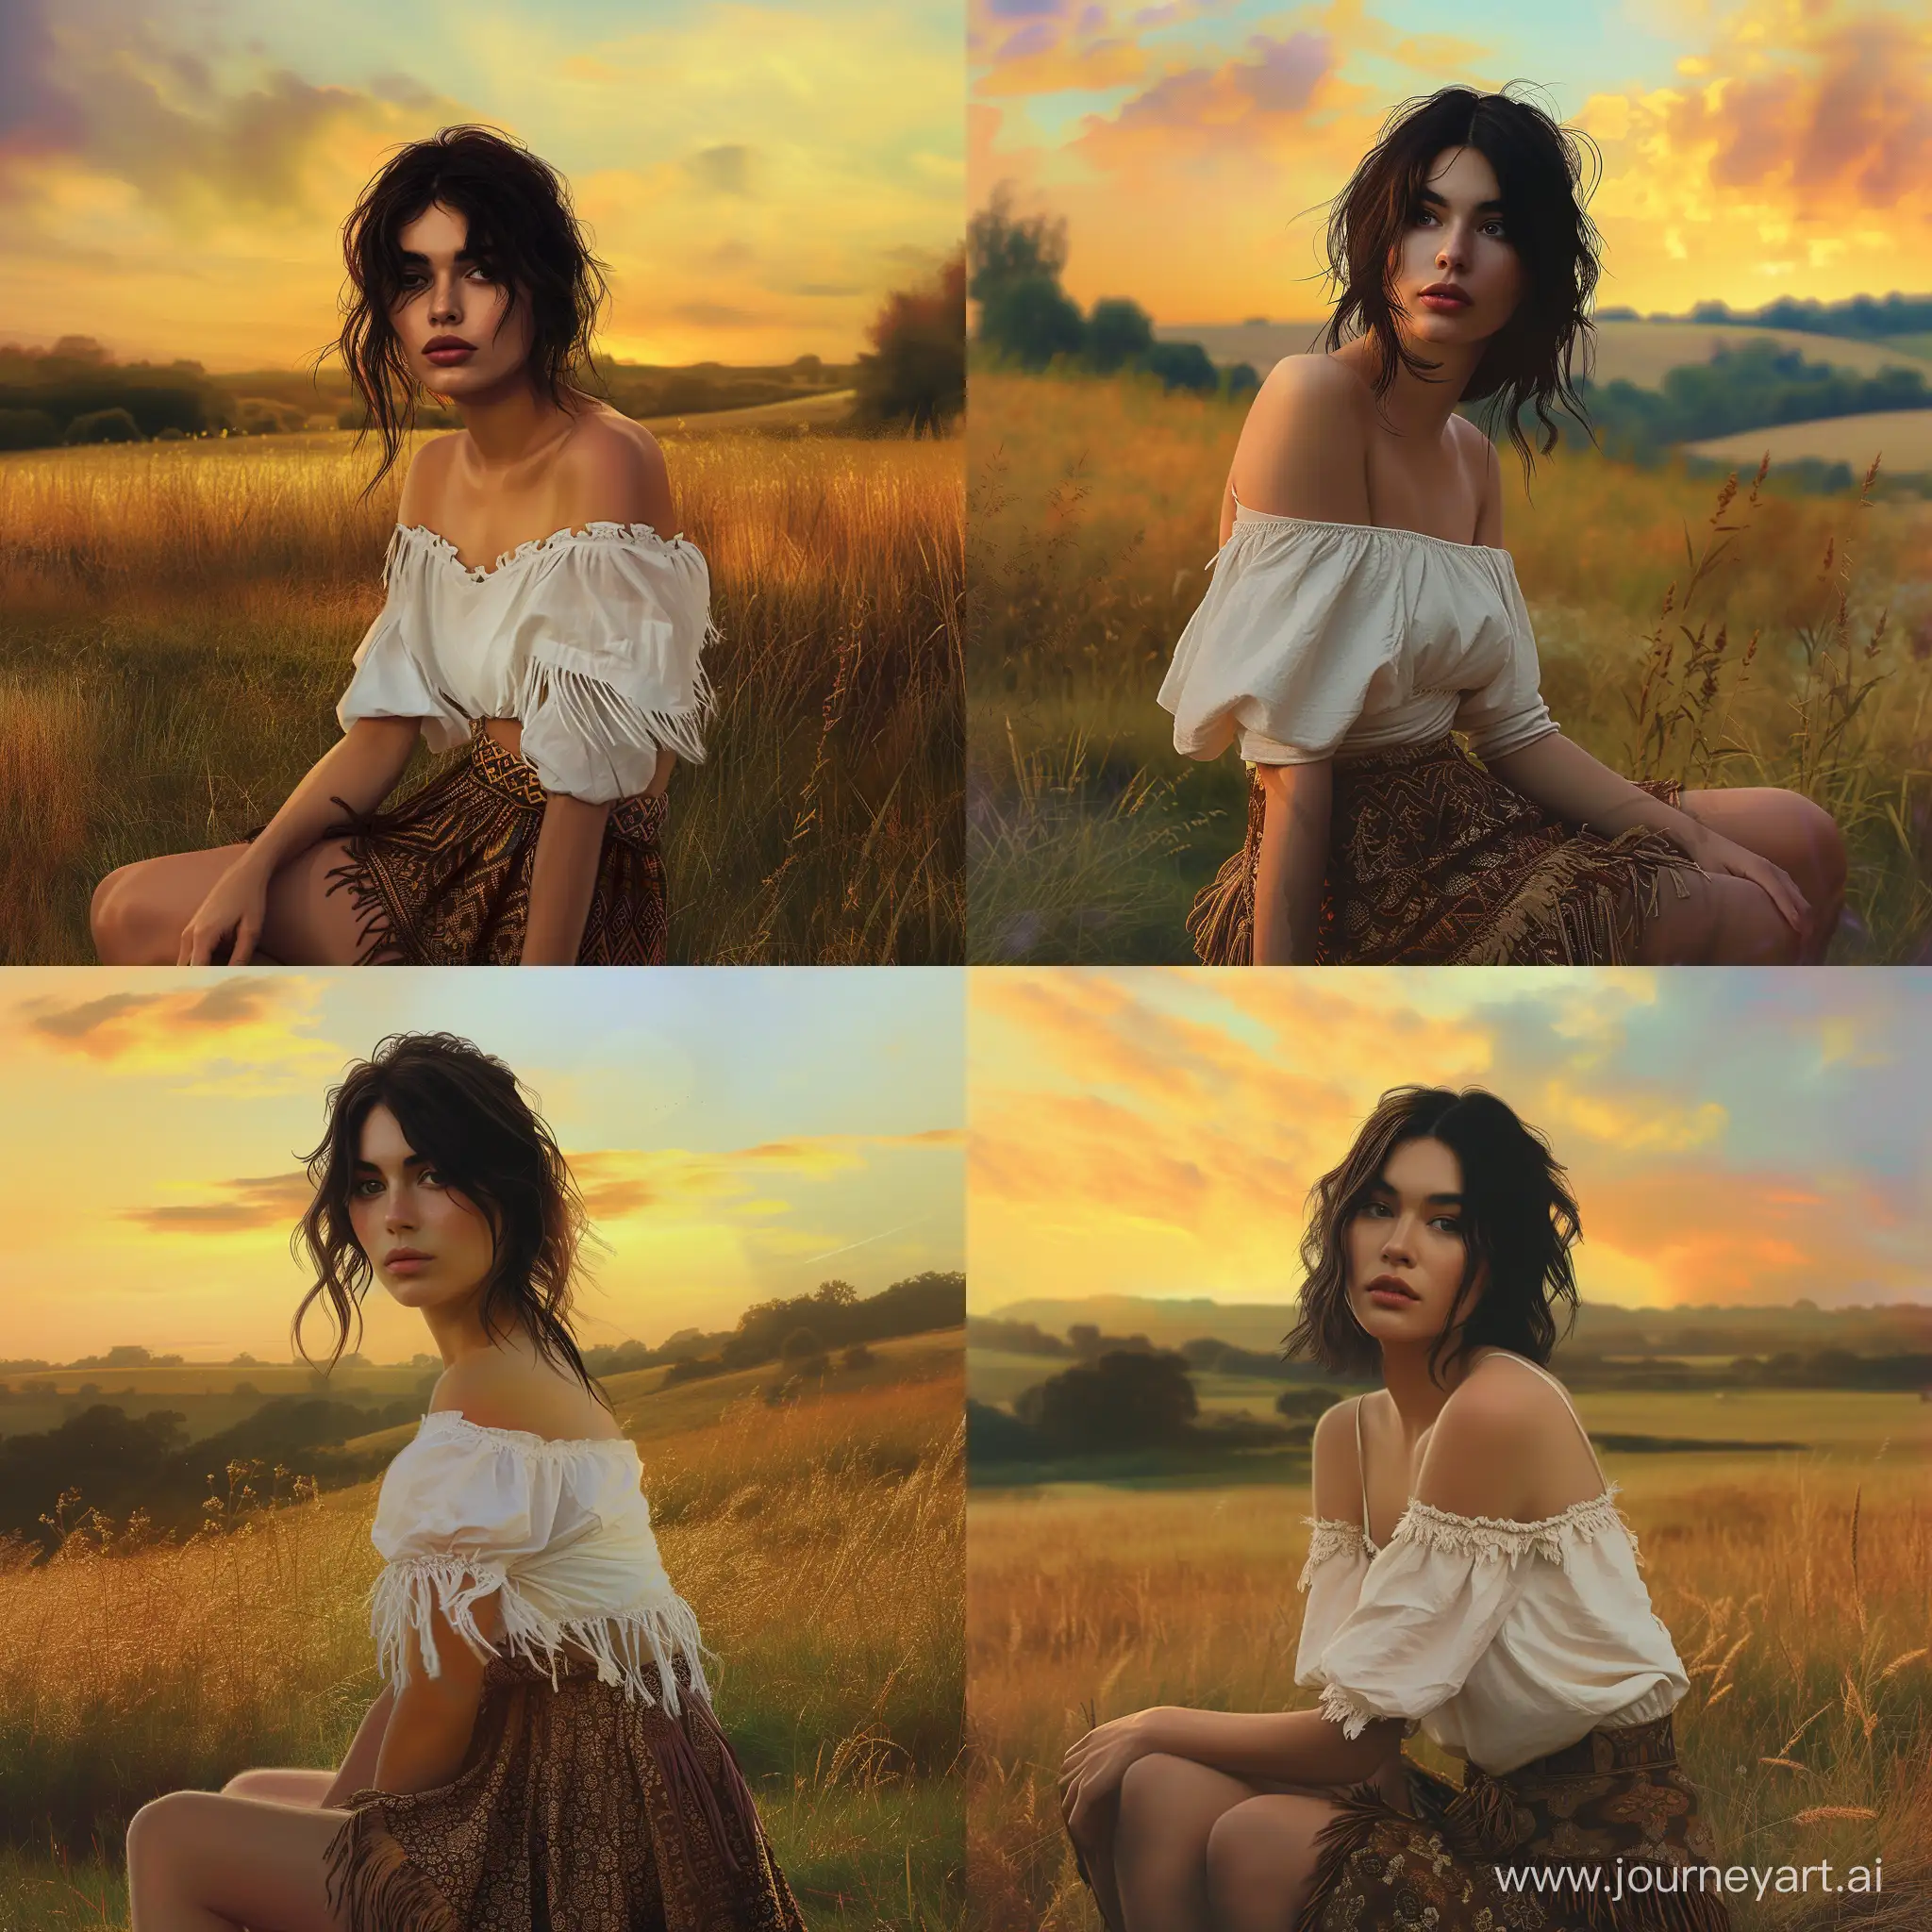 Contemplative-Woman-in-Rustic-Attire-Amidst-Golden-Fields-at-Sunset